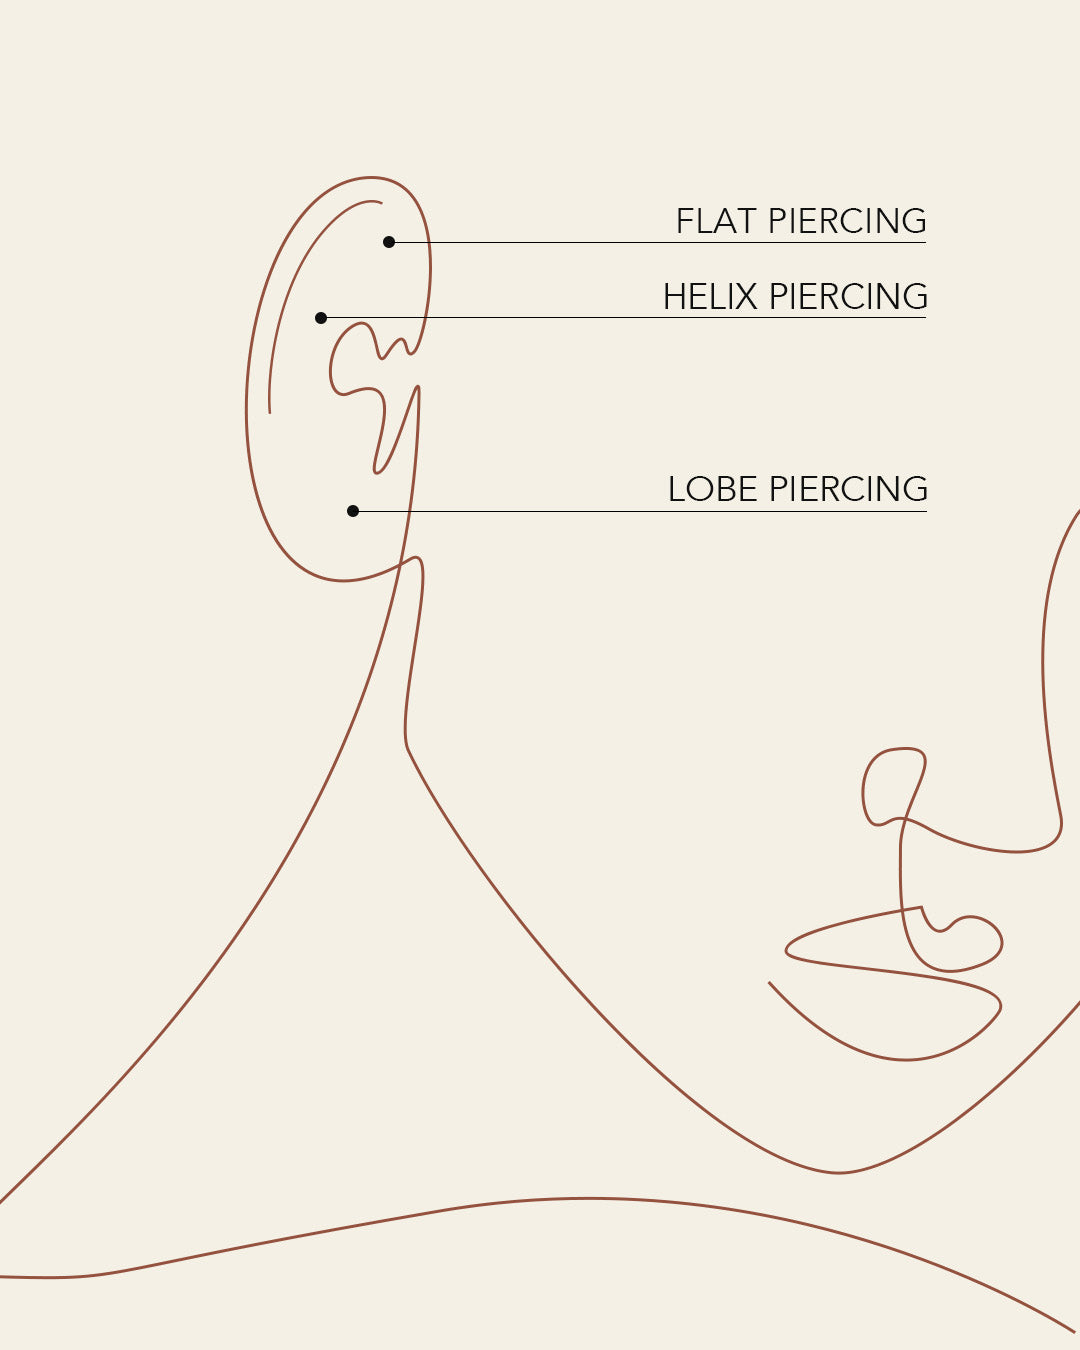 Image detailing the different options for piercing placement. Flat piercing, helix piercing and lobe piercing.